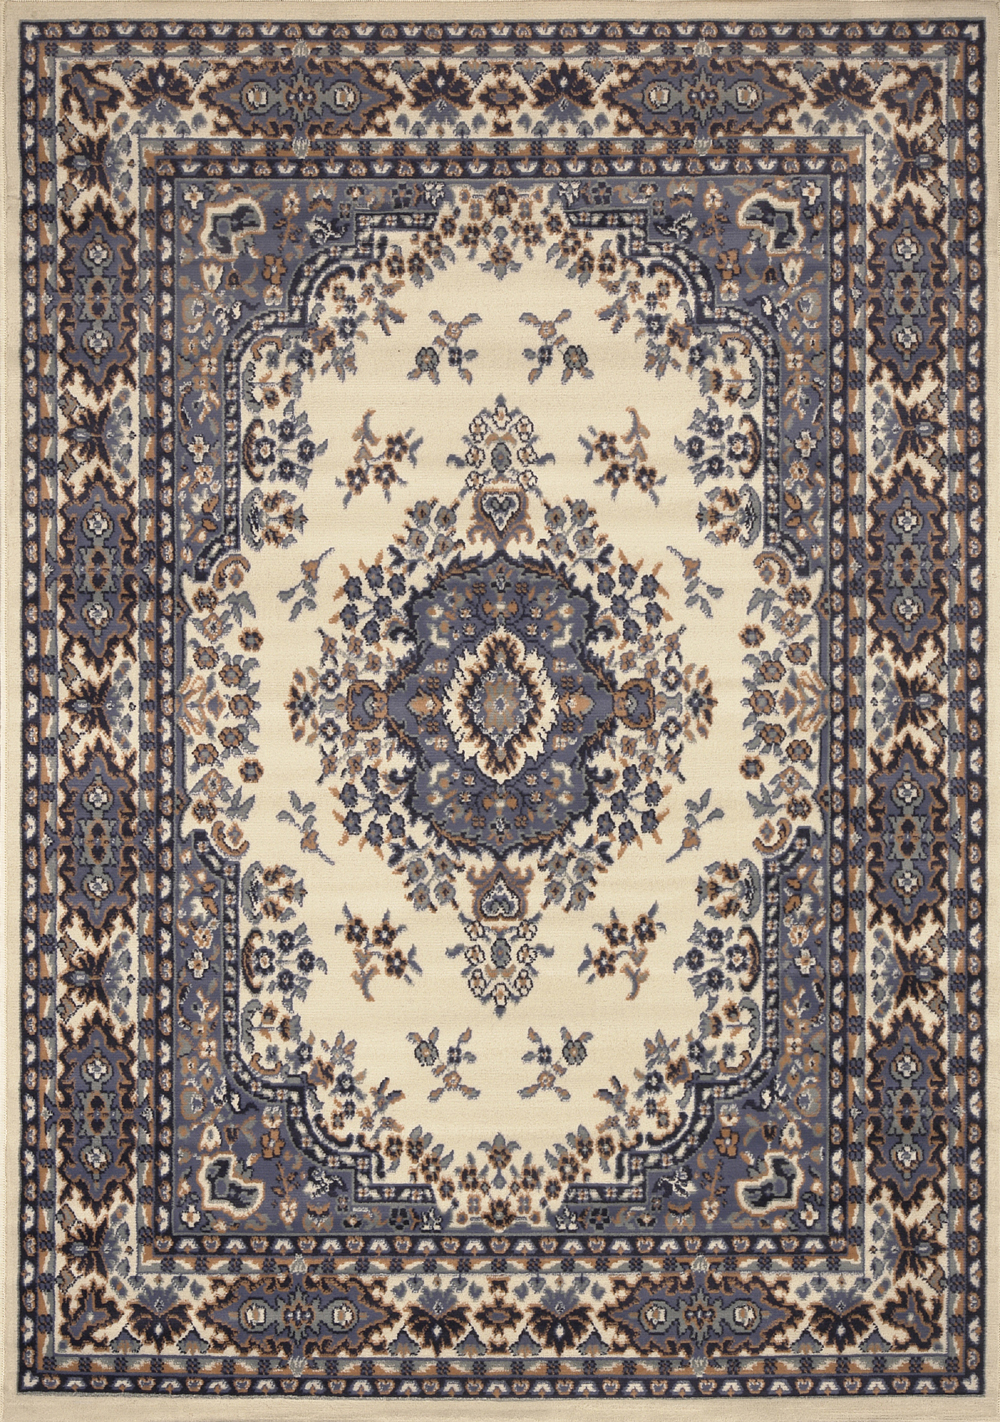 Popular Large-Traditional-8x11-Oriental-Area-Rug-Persian-Style- large traditional rugs